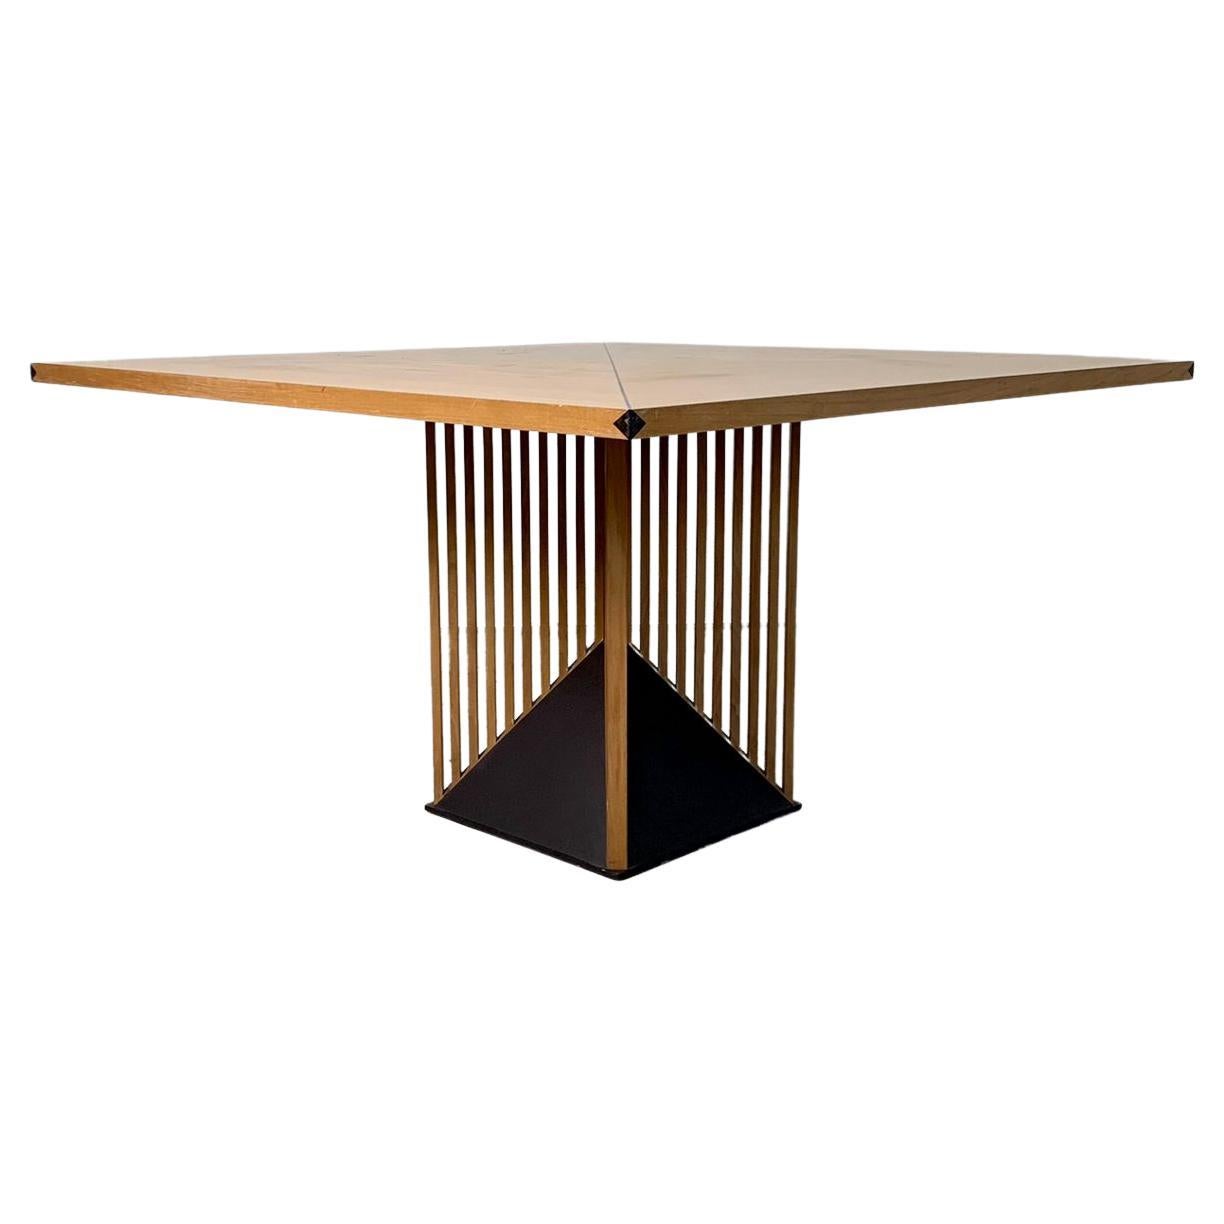 Rare Maestro dining table model by Gianfranco Frattini for Acerbis, 1980s For Sale